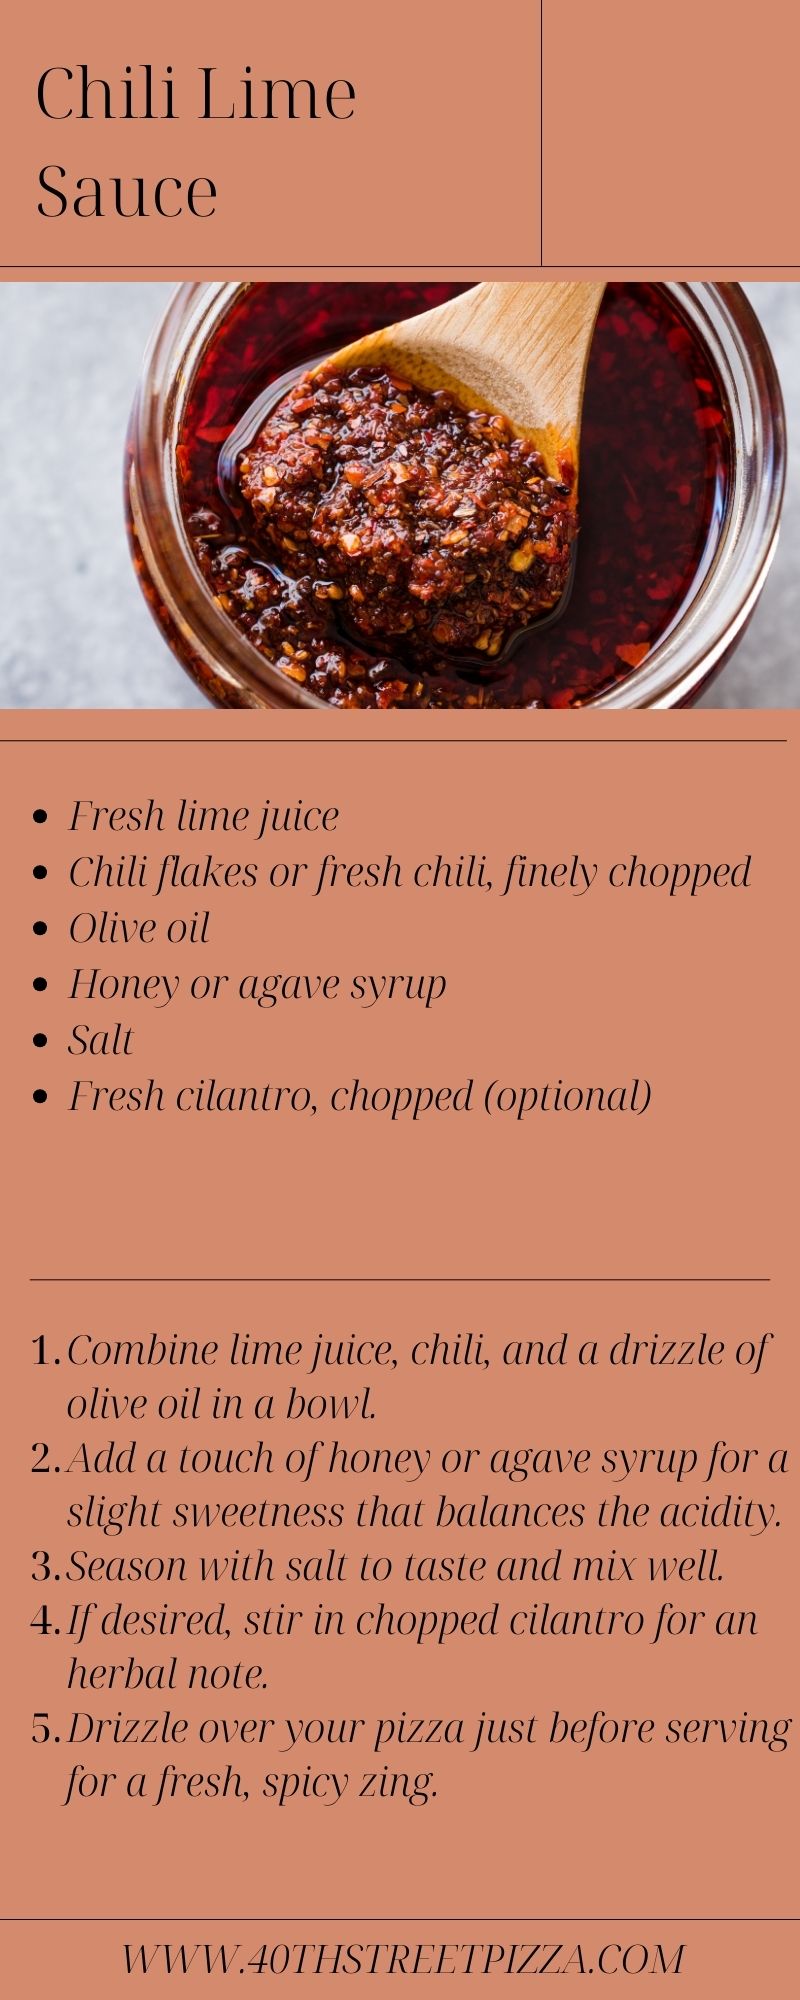 Chili Lime SauceMarinade infographic